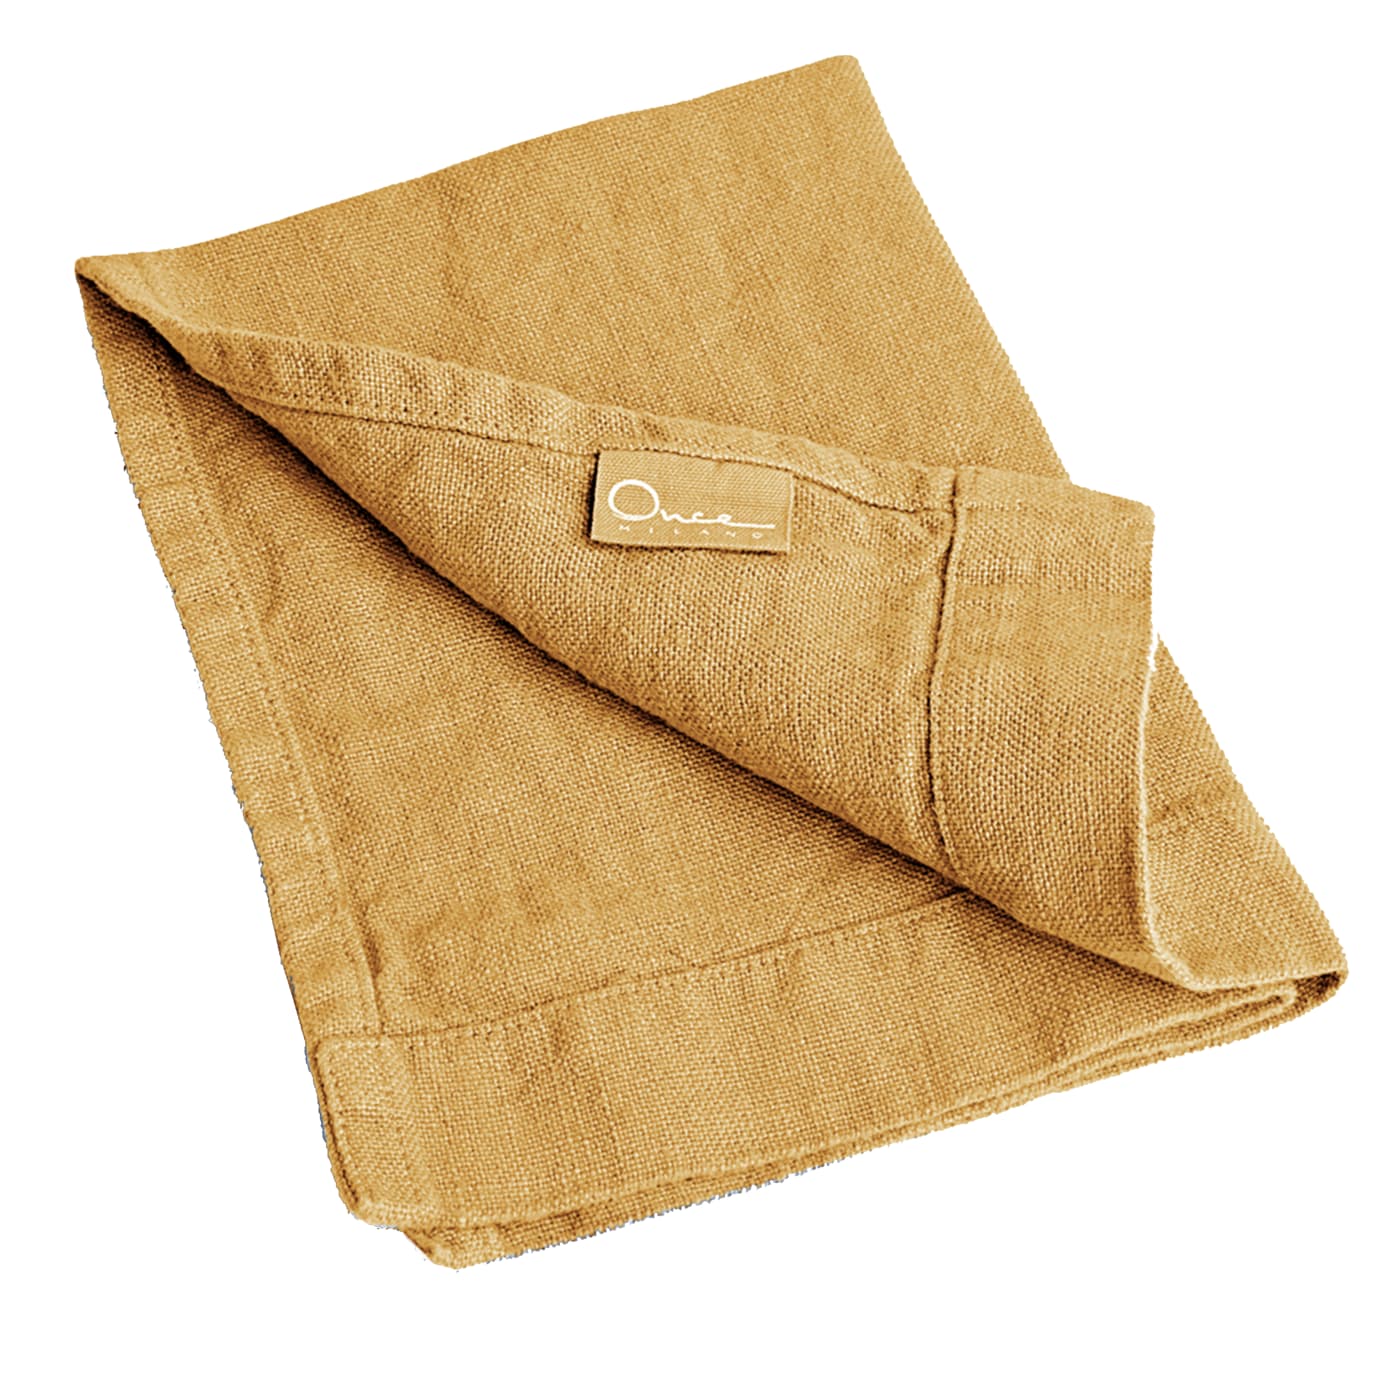 Set of 5 Mustard Linen Hand Towels - Once Milano